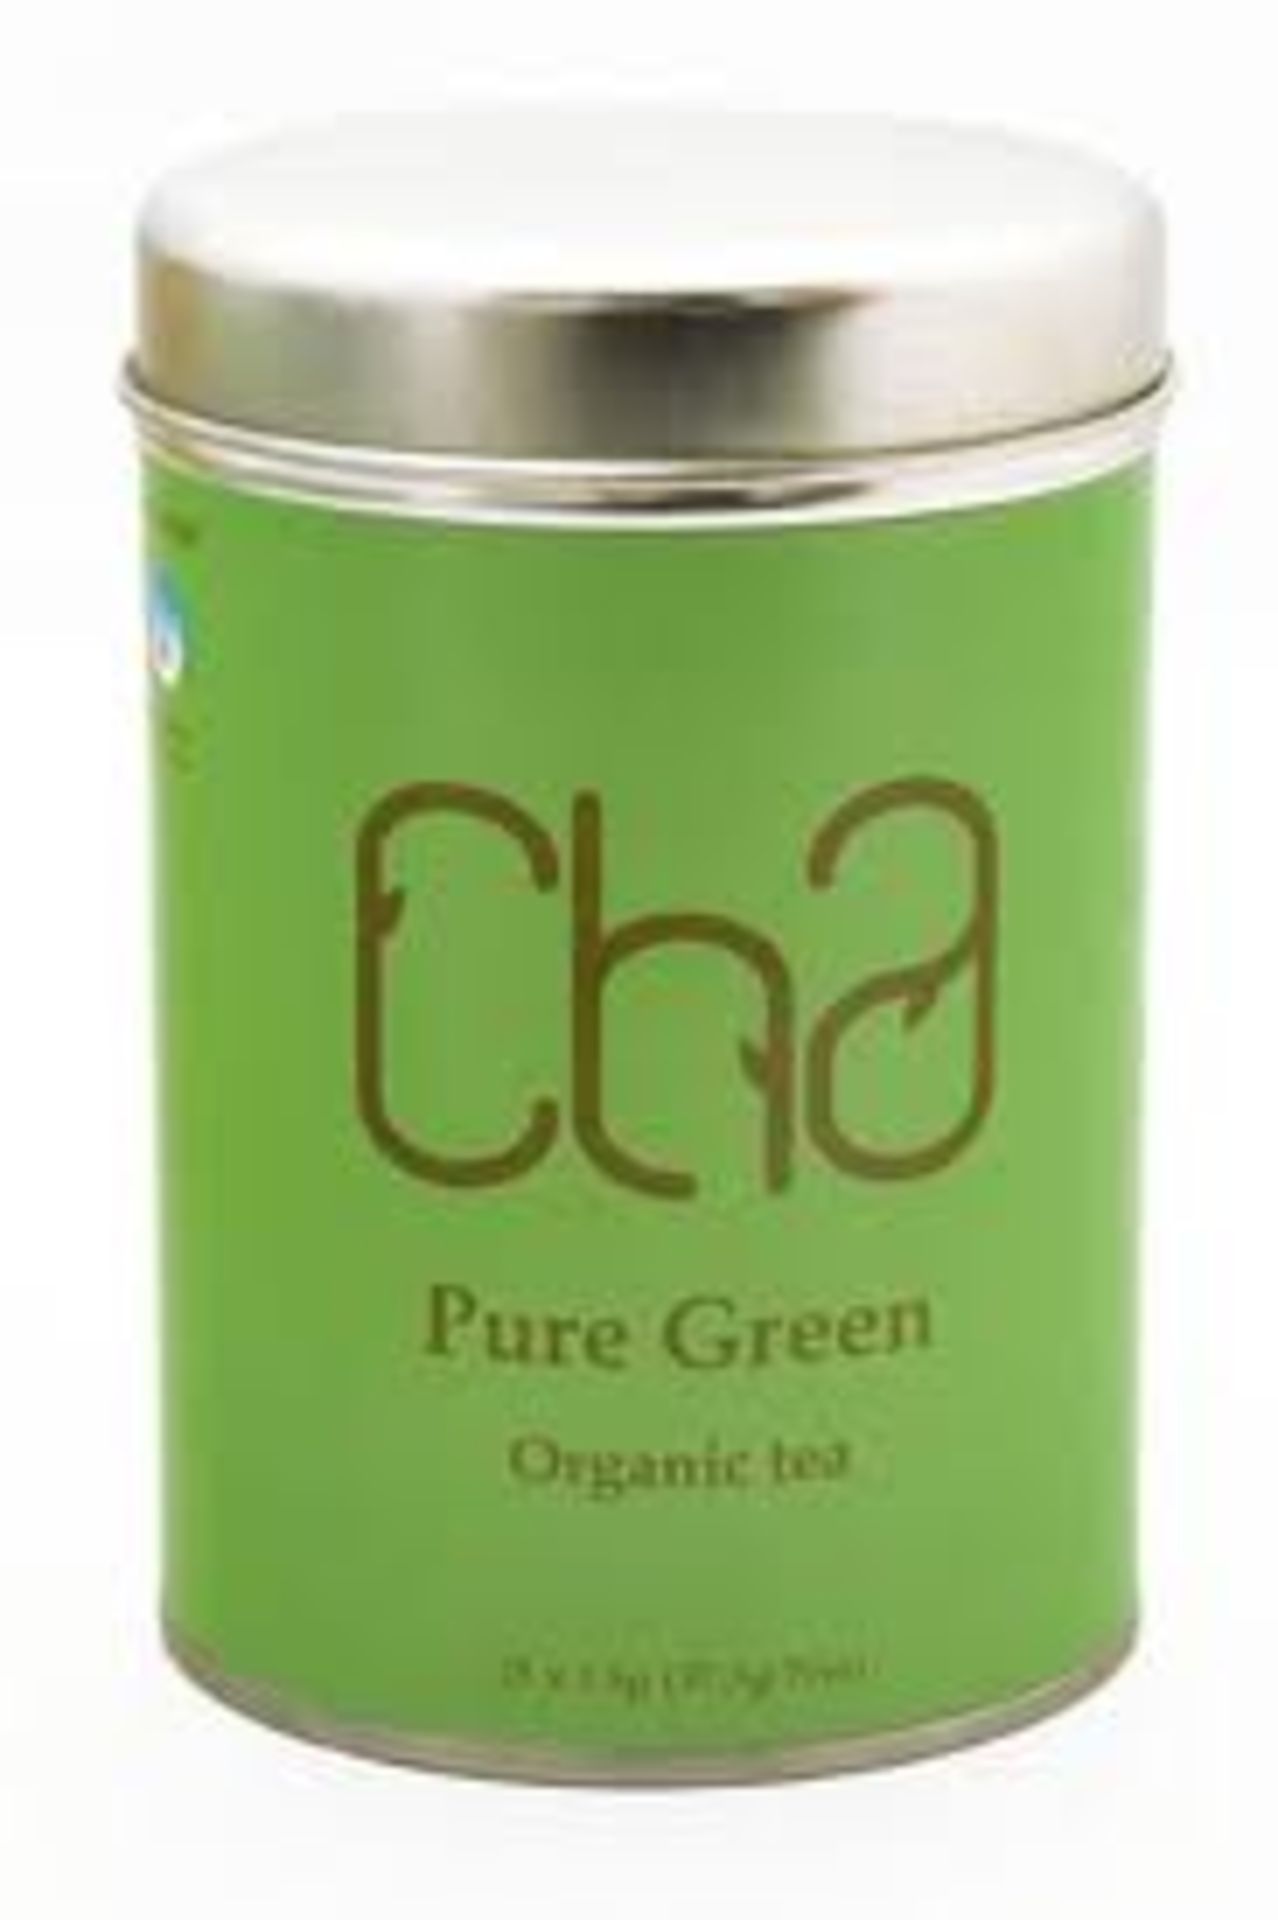 Resale Pallet - 720 x Tins of CHA Organic Tea - PURE BLACK AND PURE GREEN - 100% Natural and Organic - Image 3 of 4